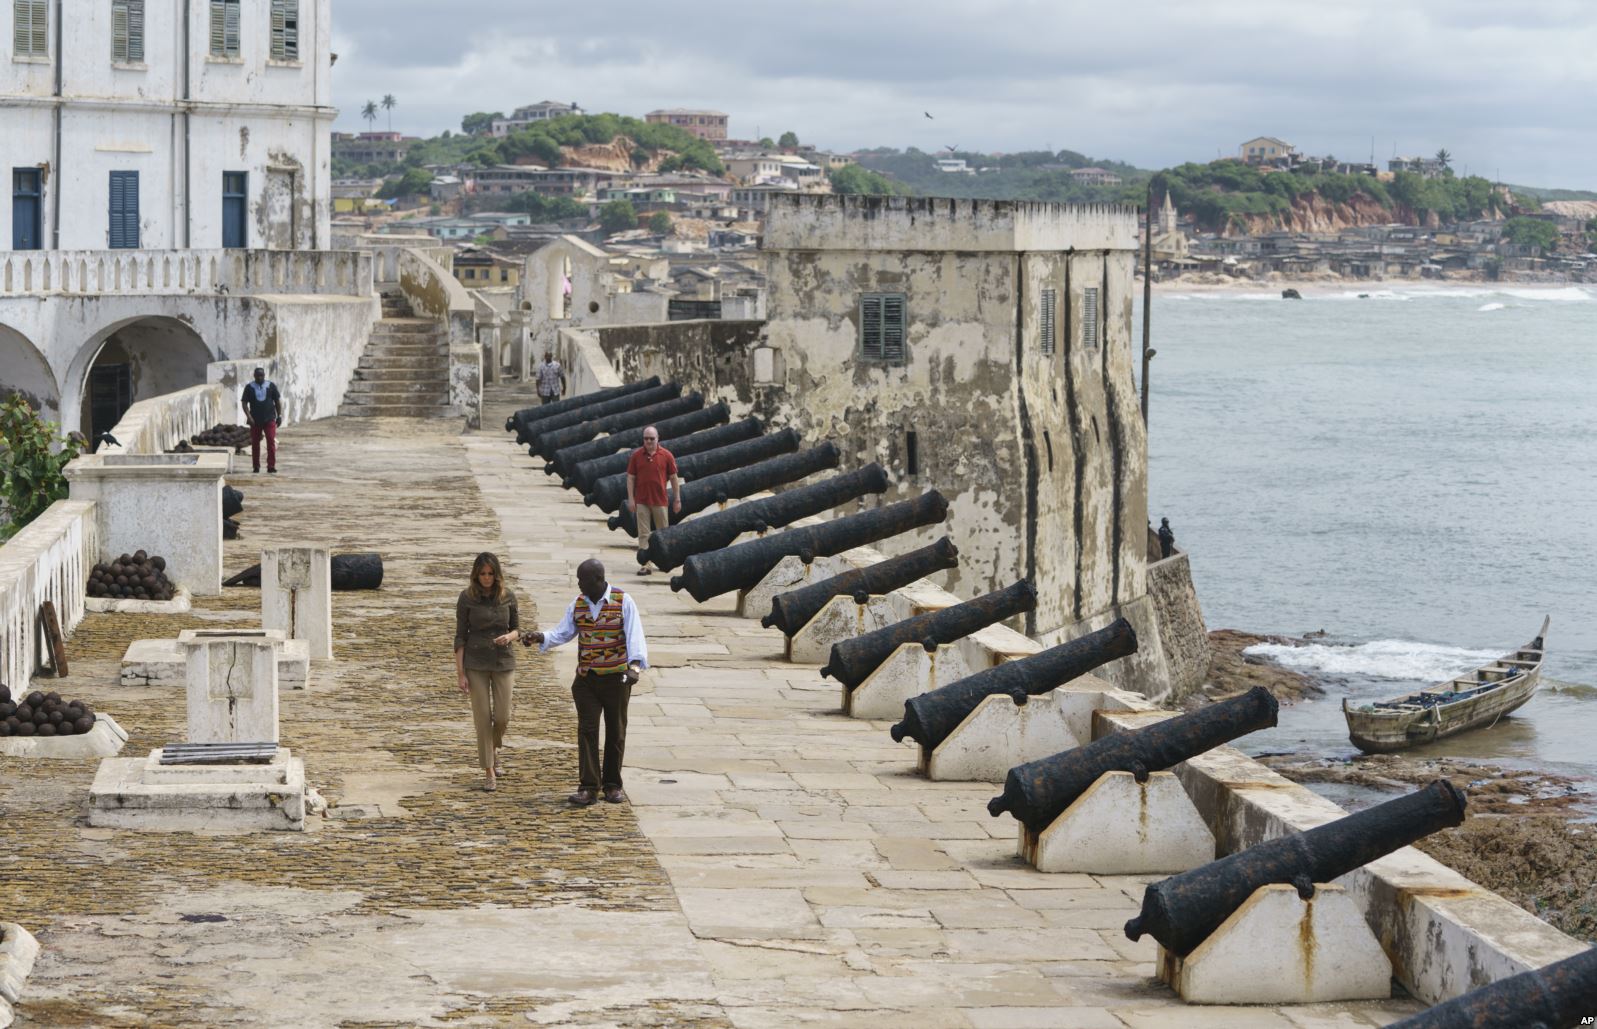 Melania Trump being taken around the Cape Coast Castle by a tour guide in the picture below. Photo credit: Reuters